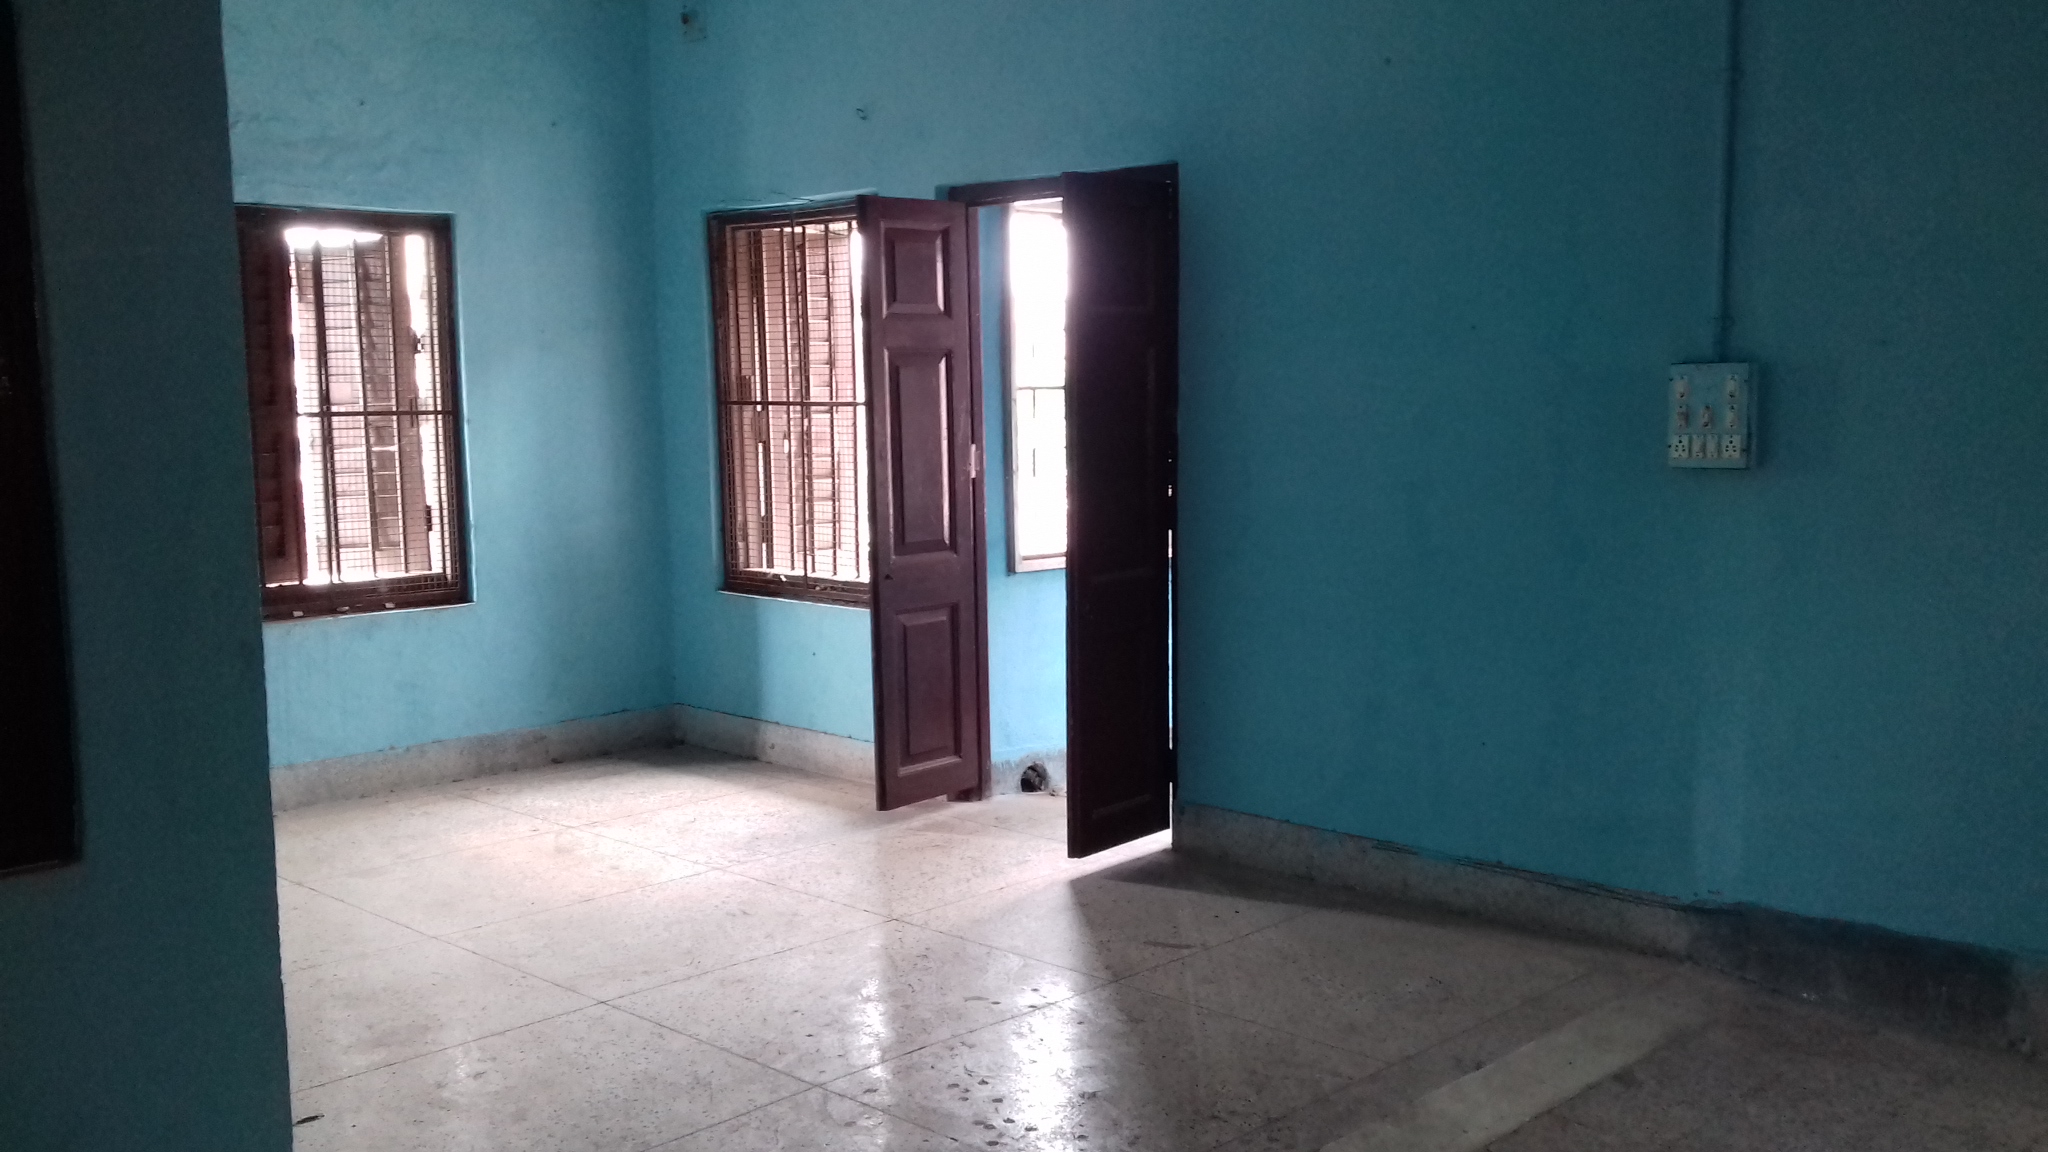 Commercial Building For Lease in Tangra Kolkata (Id: 18970)